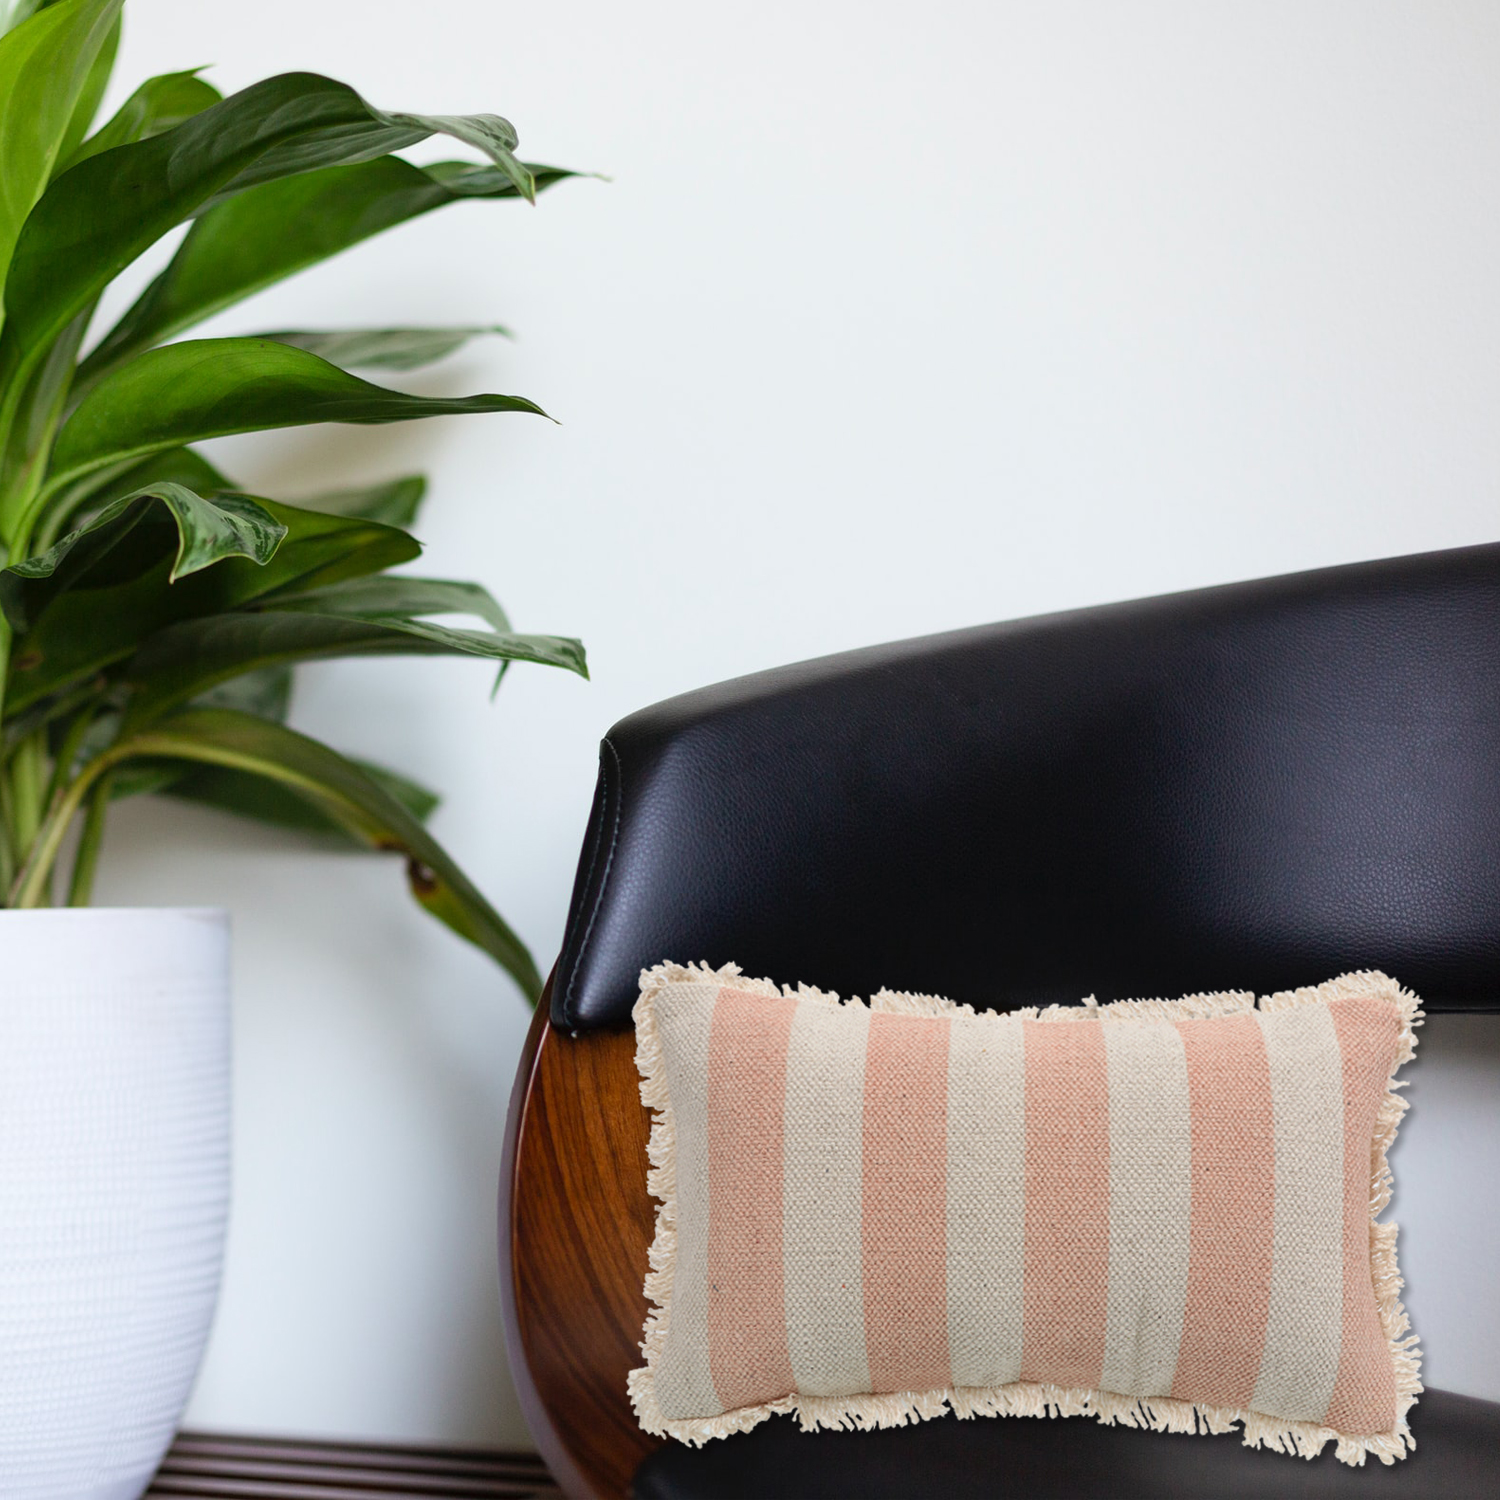 Printed Stripe Pink Cushions Covers with fringes 12X20 Inch